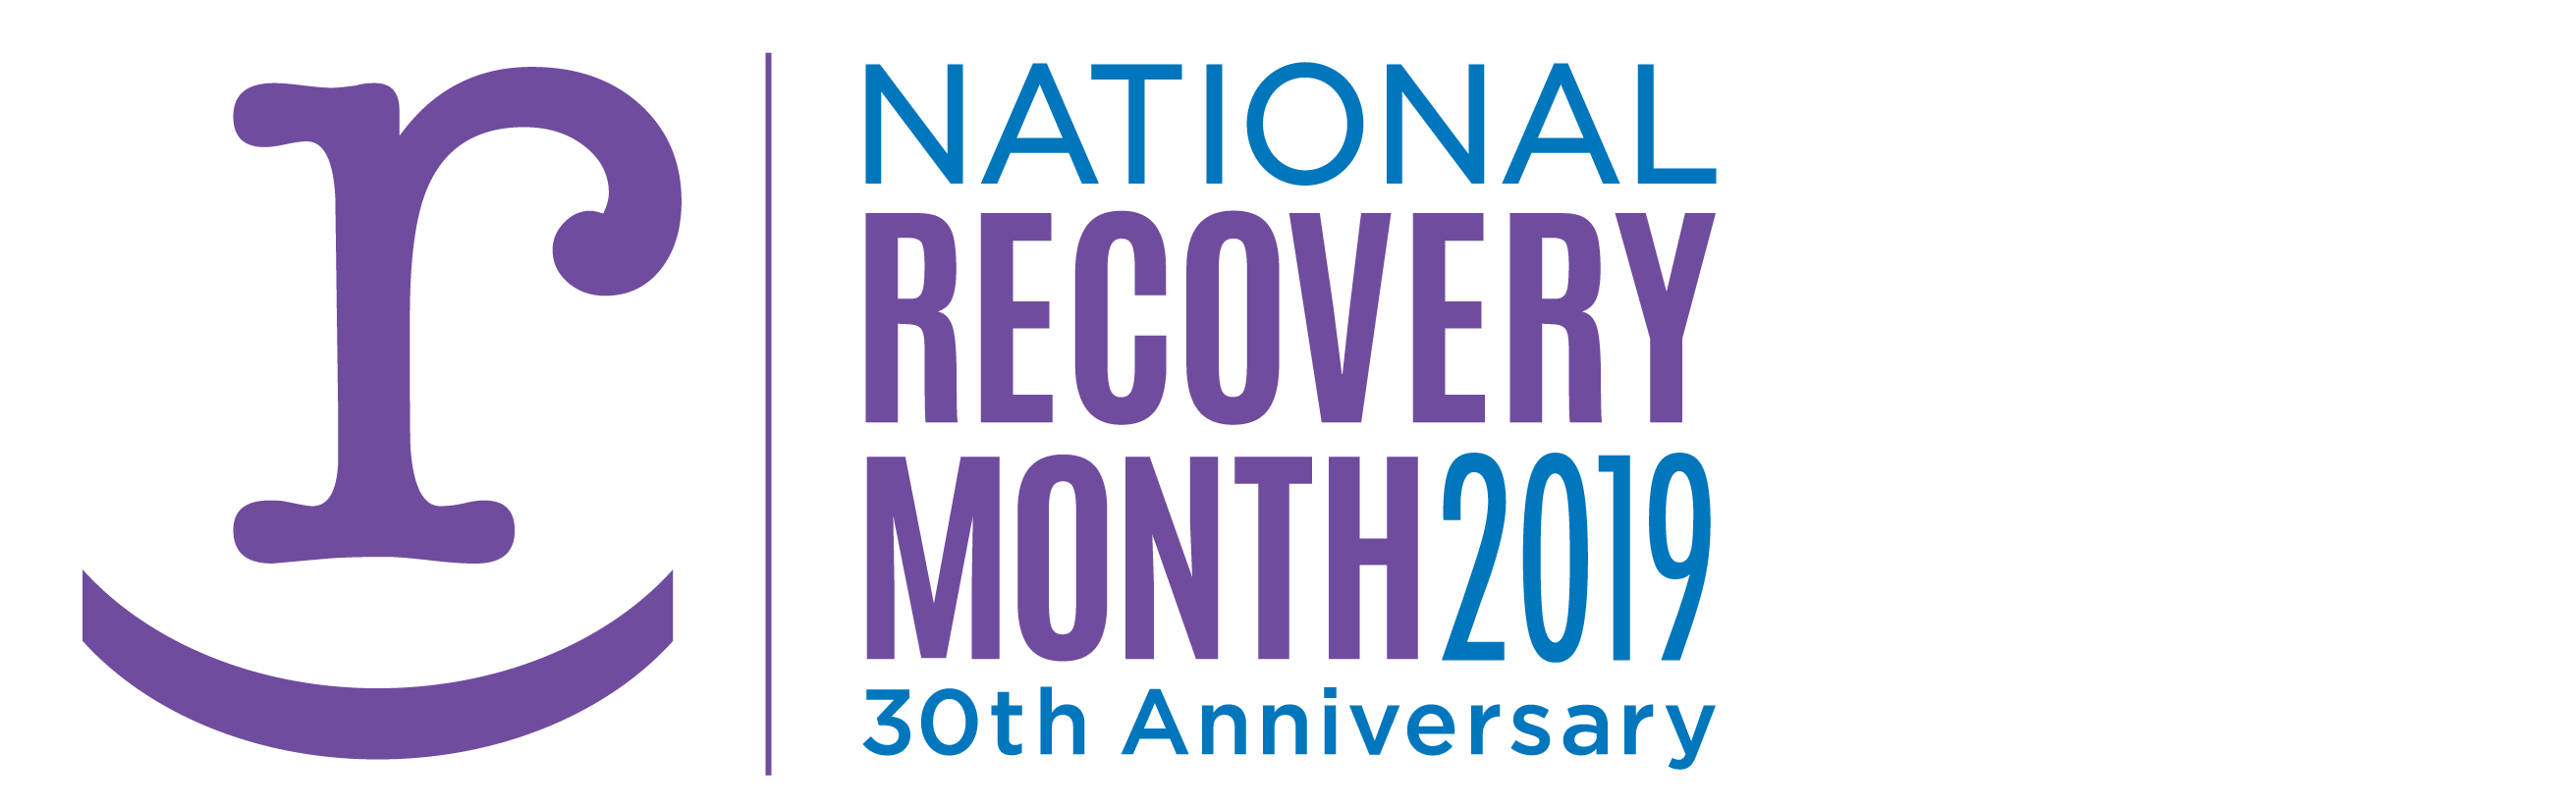 SAMHSA Logo - Recovery Month Logos and r is For Recovery Symbols | RecoveryMonth.gov